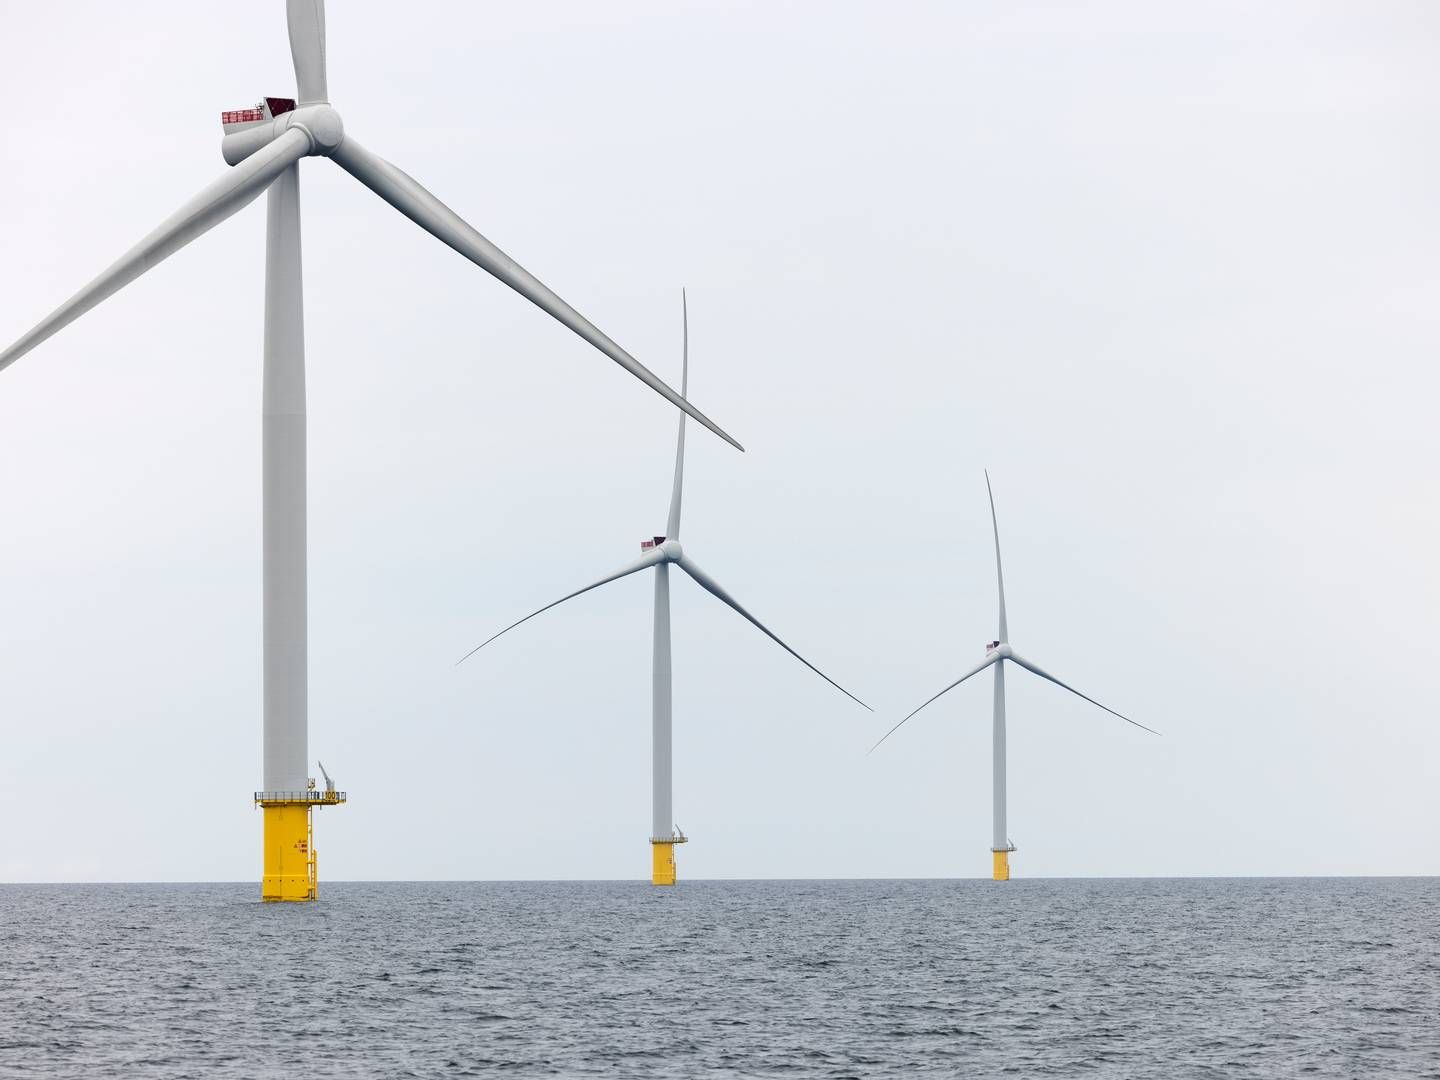 Offshore wind turbines are at great risk to cyber attacks. | Photo: Marcus Emil Christensen